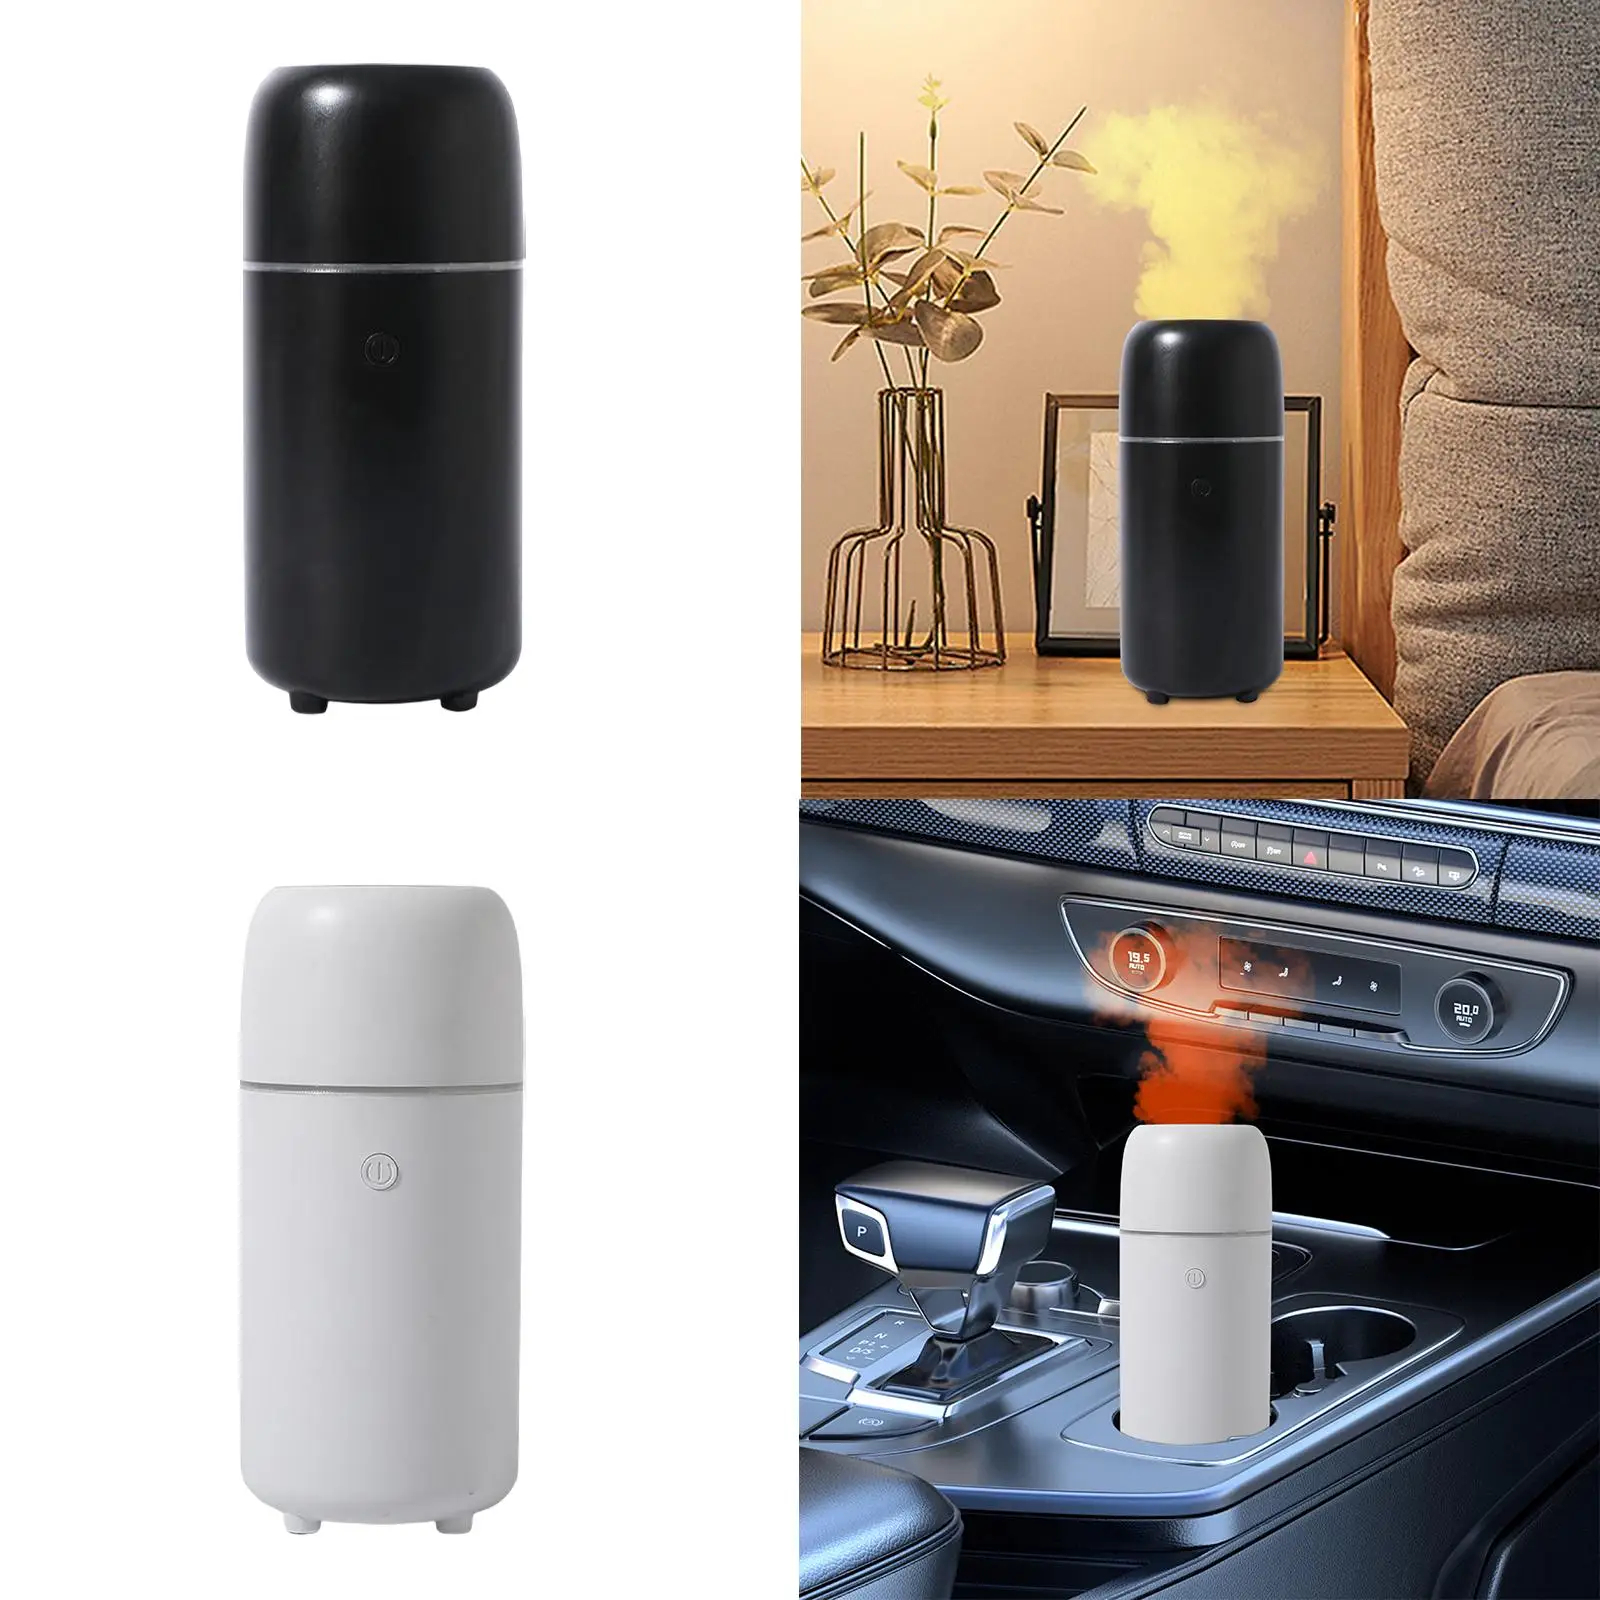 Mini Humidifier Cool Mist Auto Shut Off 100ml Low Noise Air Humidifier Desktop Humidifier for Home Nursery Office Car Travel